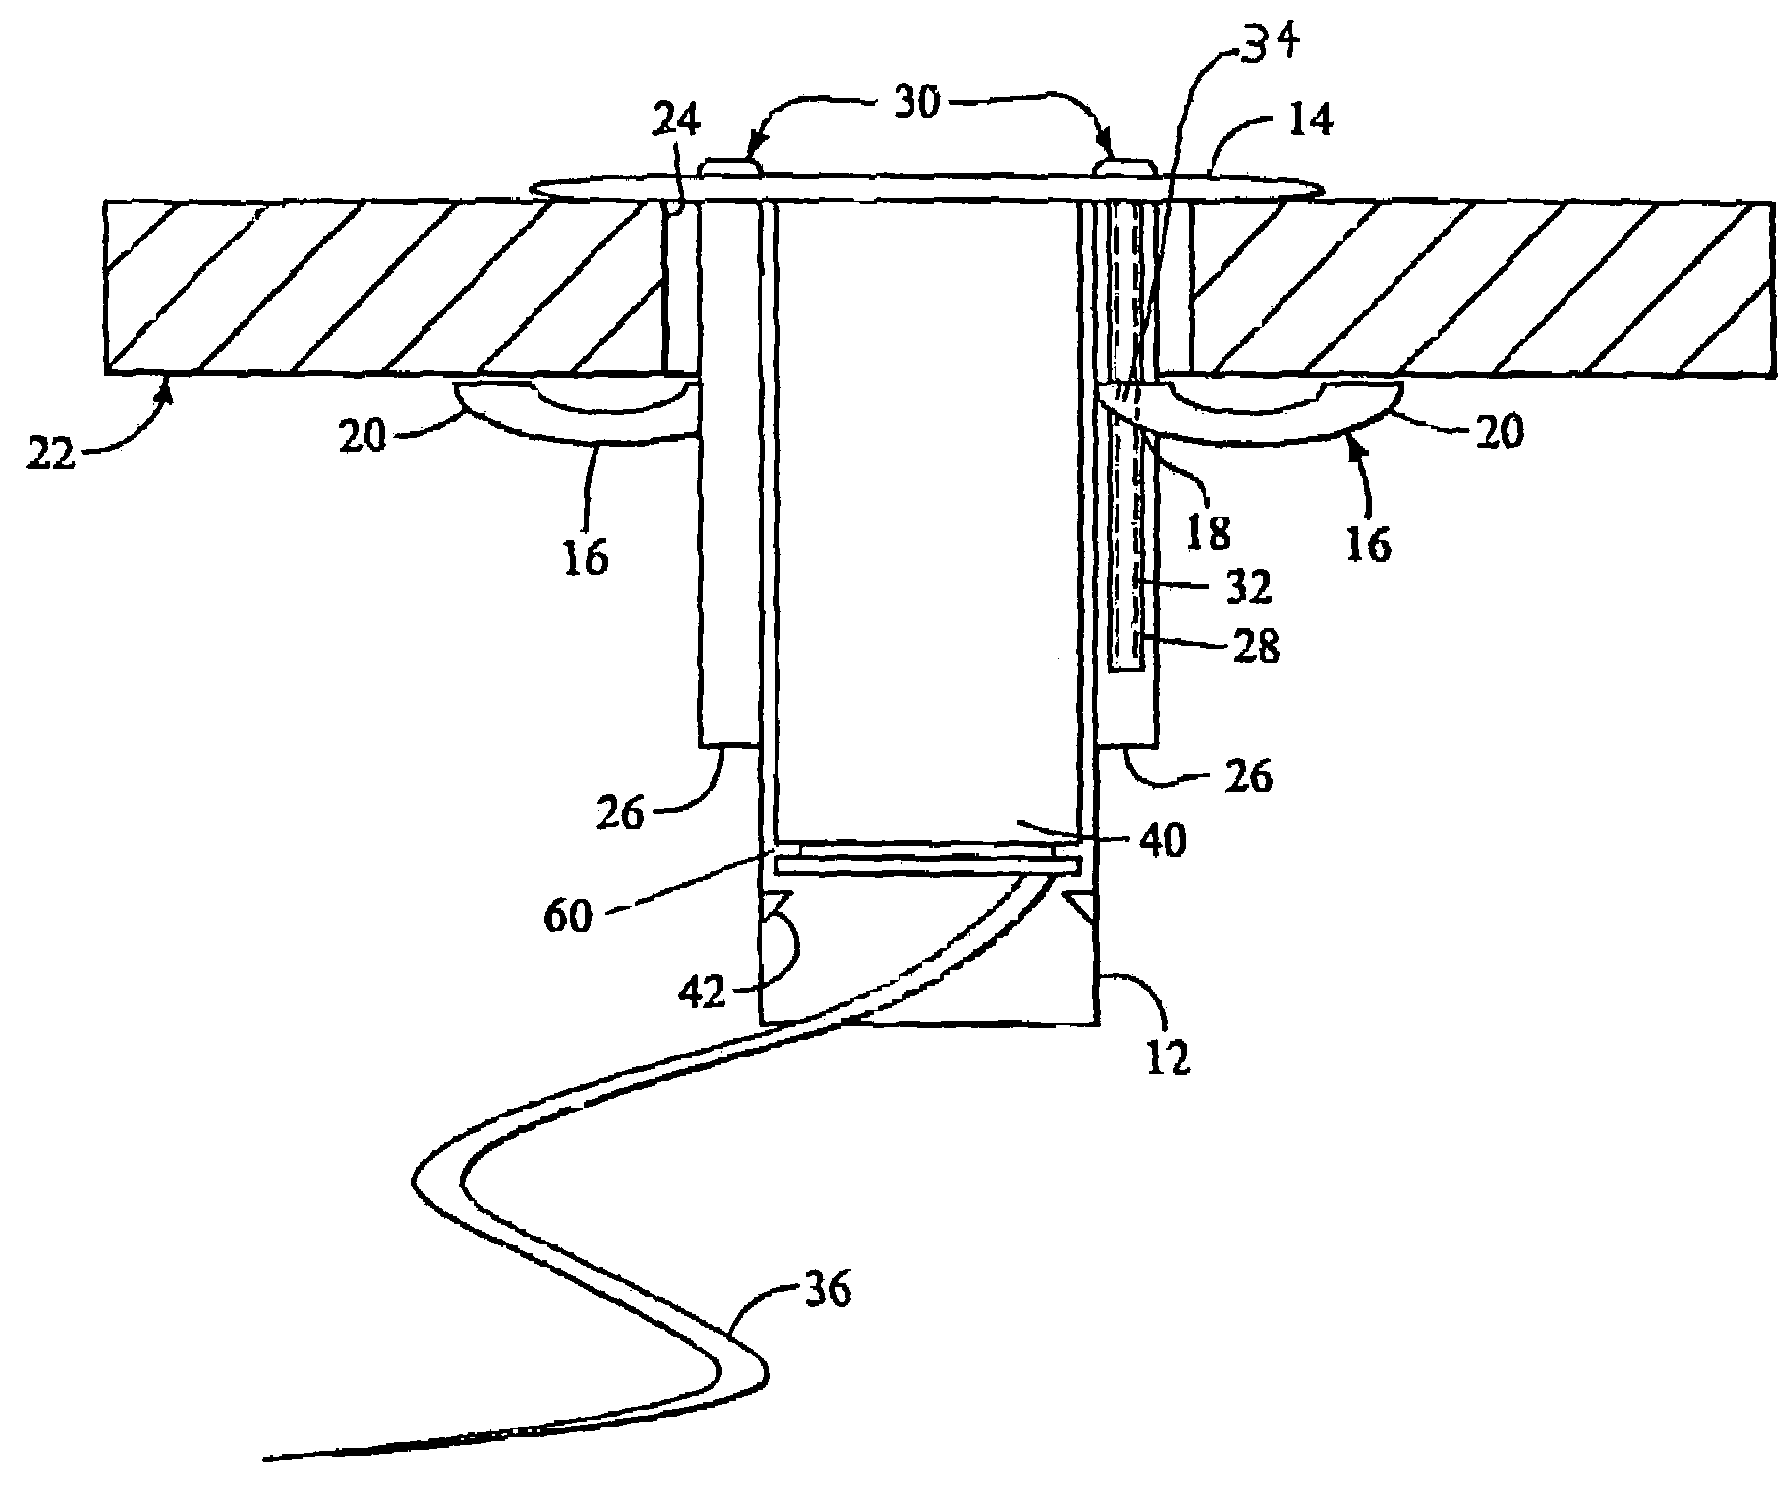 Mechanical mounting configuration for flushmount devices